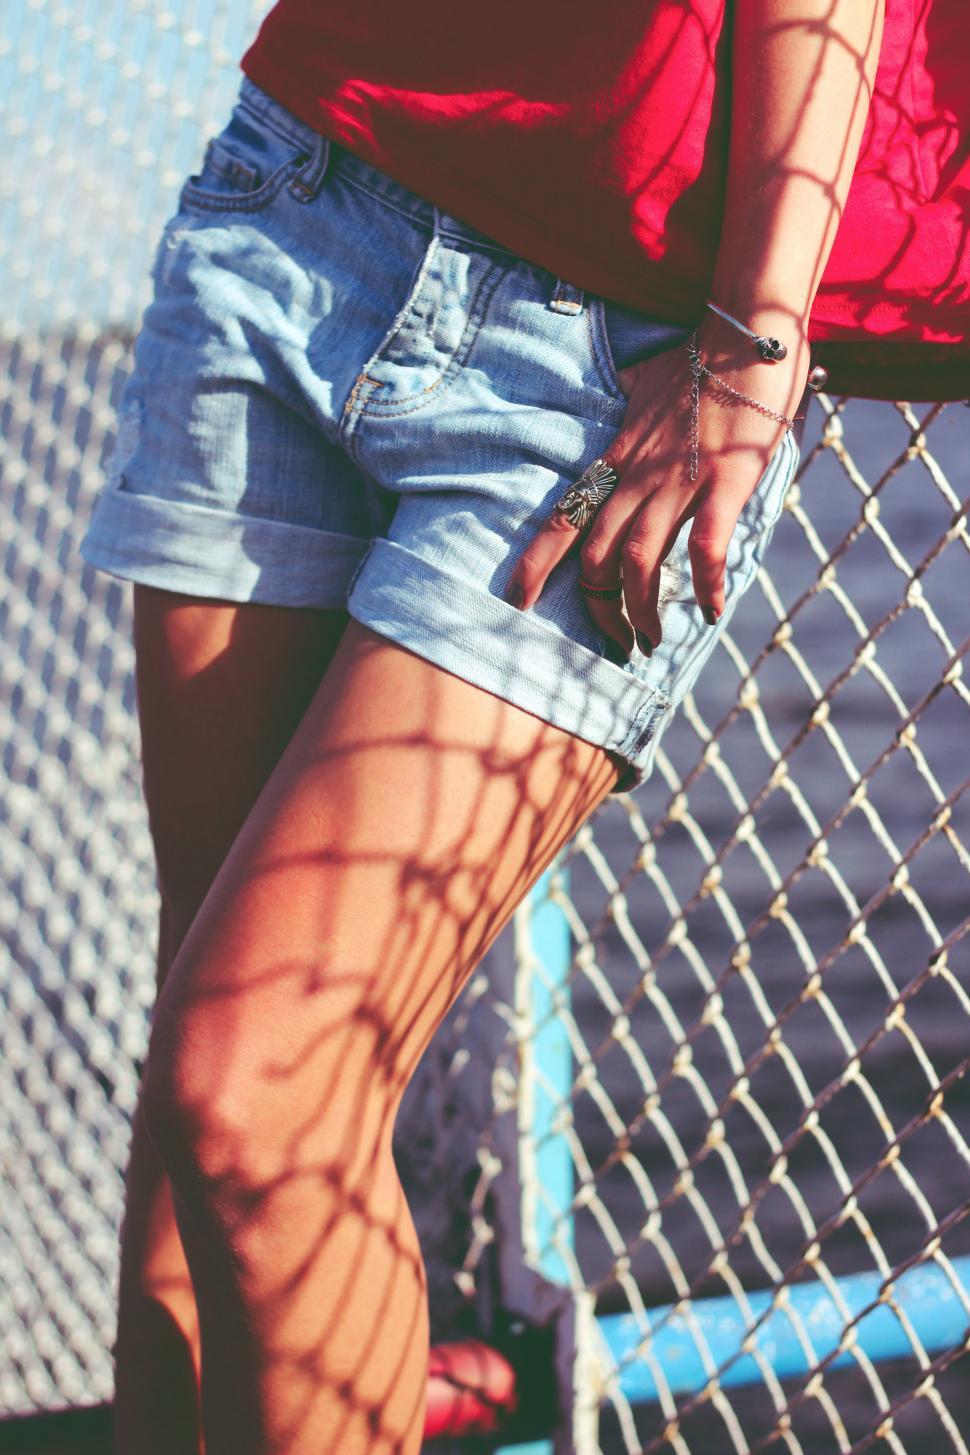 Free Image of Woman Standing Next to Chain Link Fence 